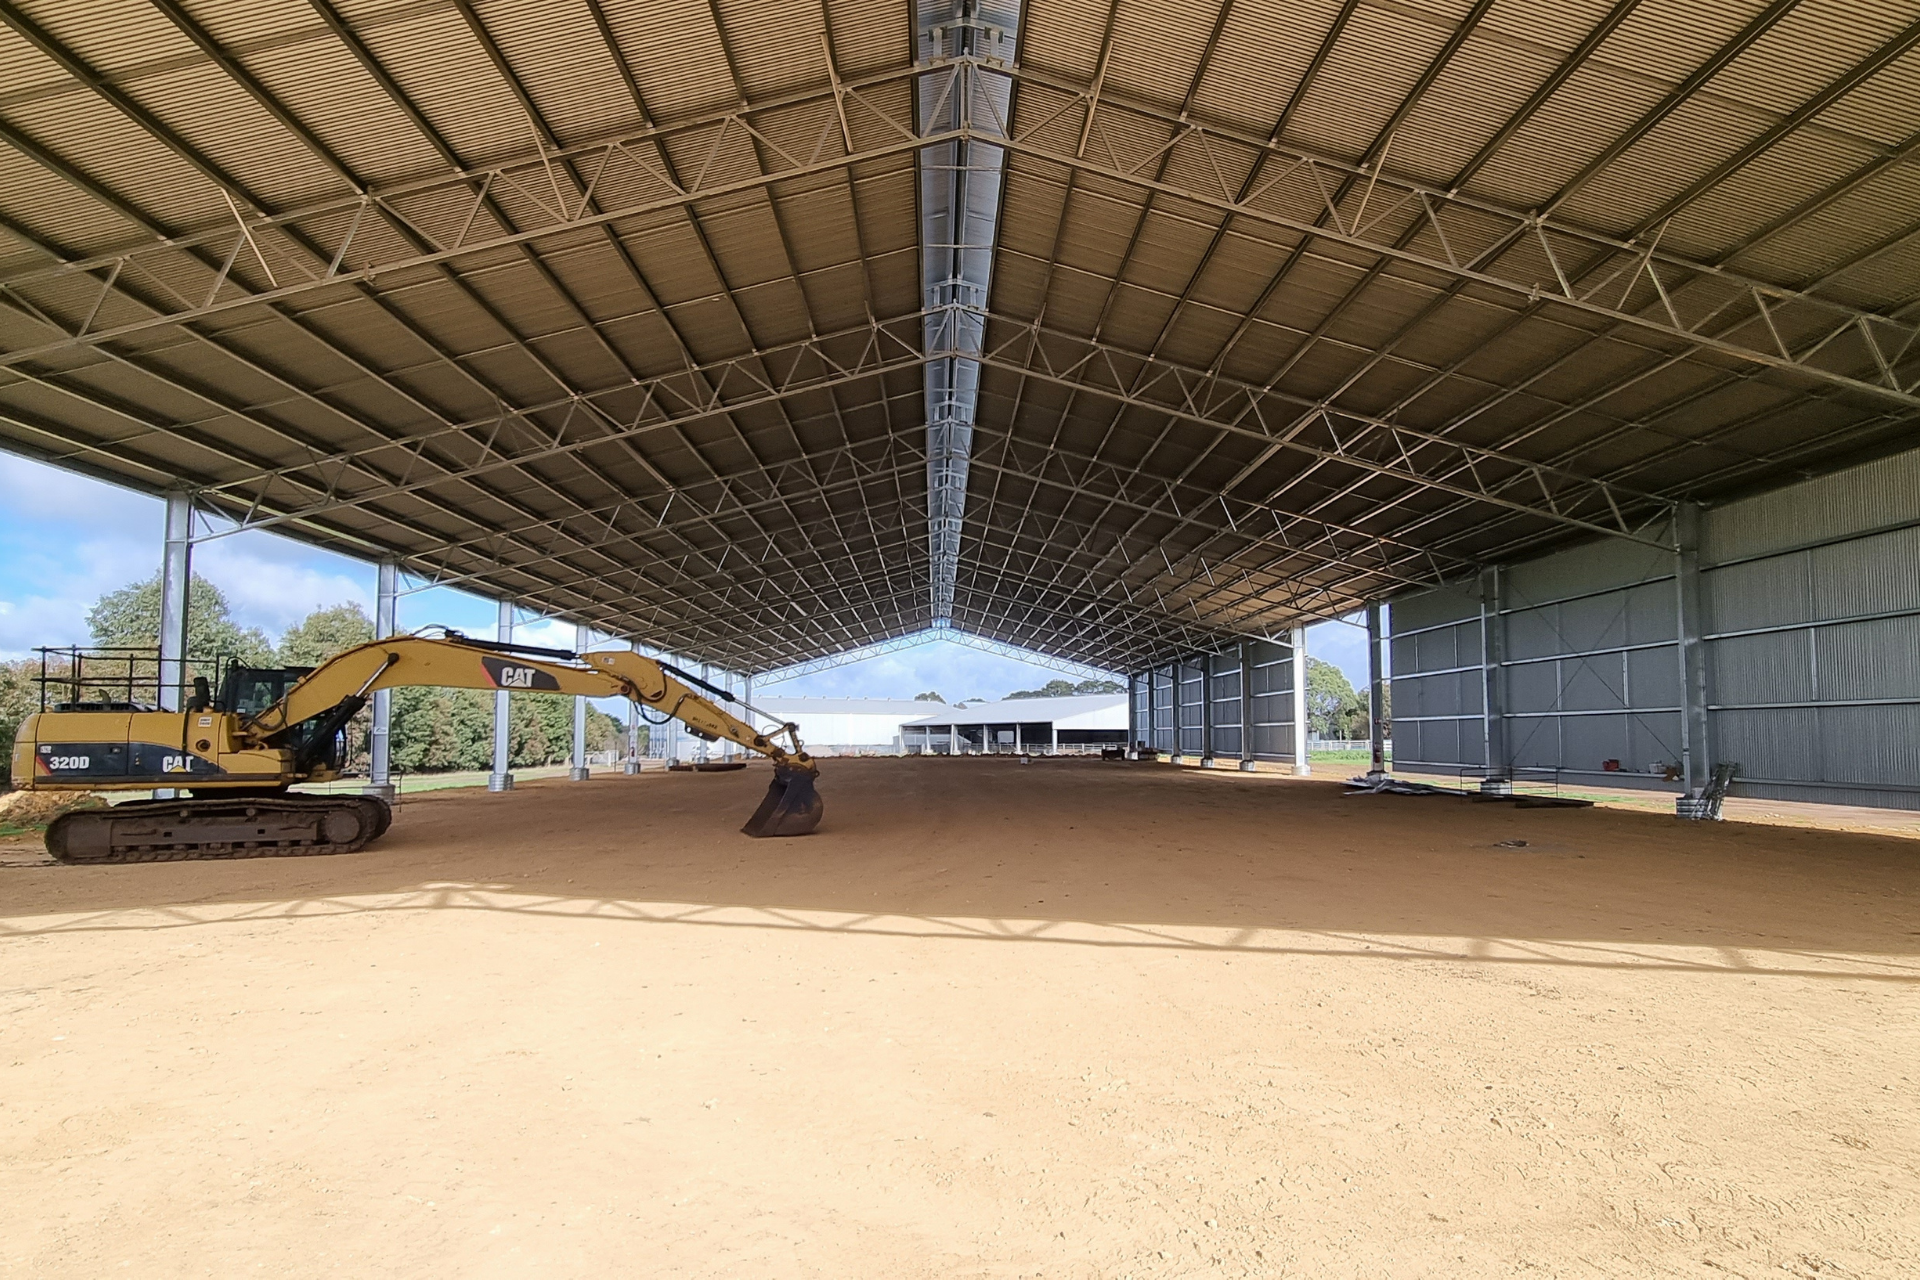 You are currently viewing 92.4m x 30m x 6m lamb feedlot cover